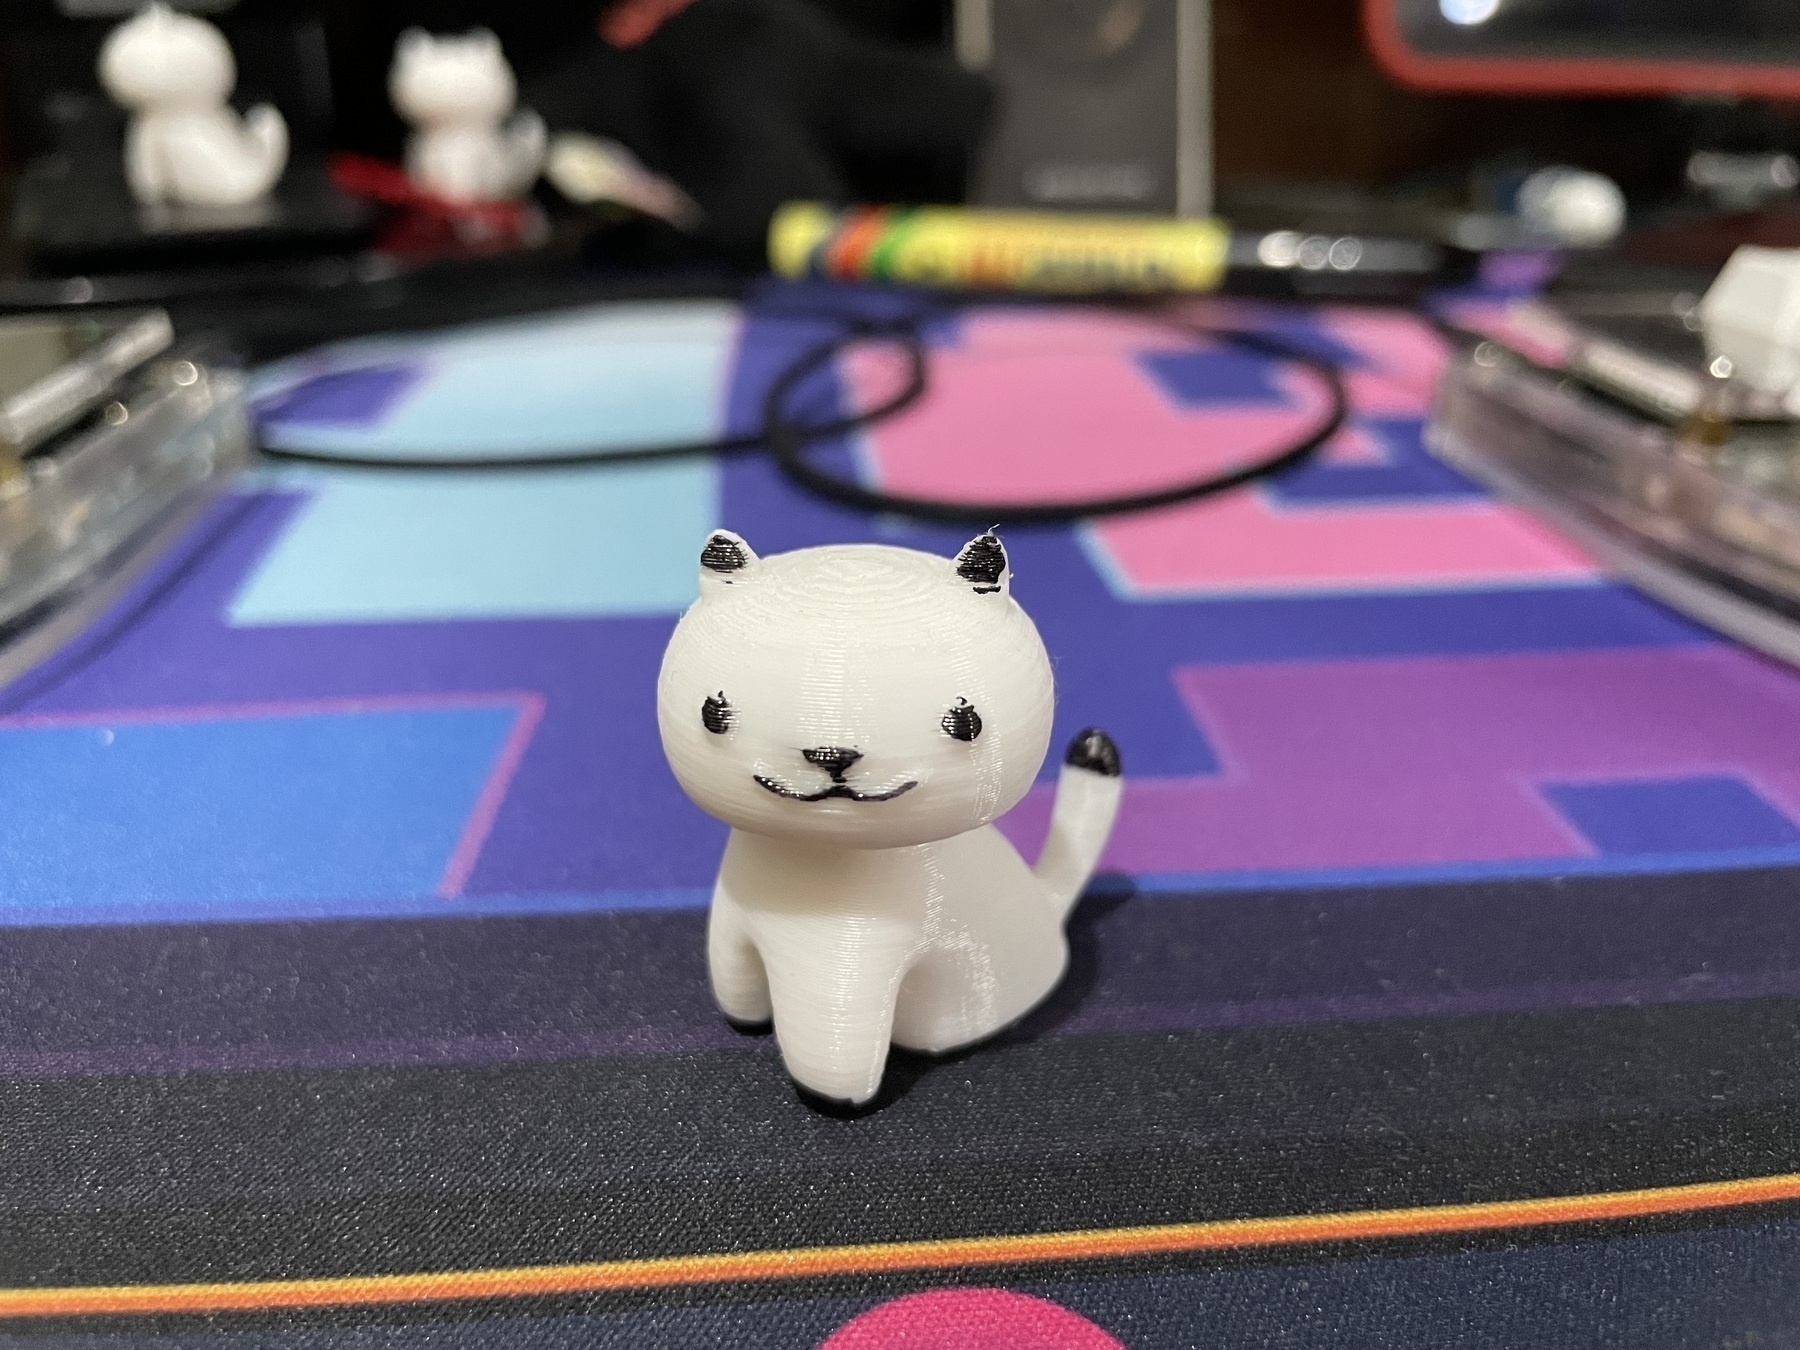 A 3d-printed white cat with distinctive features like its ears, eyes, nose, mouth, paws, and tail tip colored in with a black marker. The cat is seated on a computer deskmat.